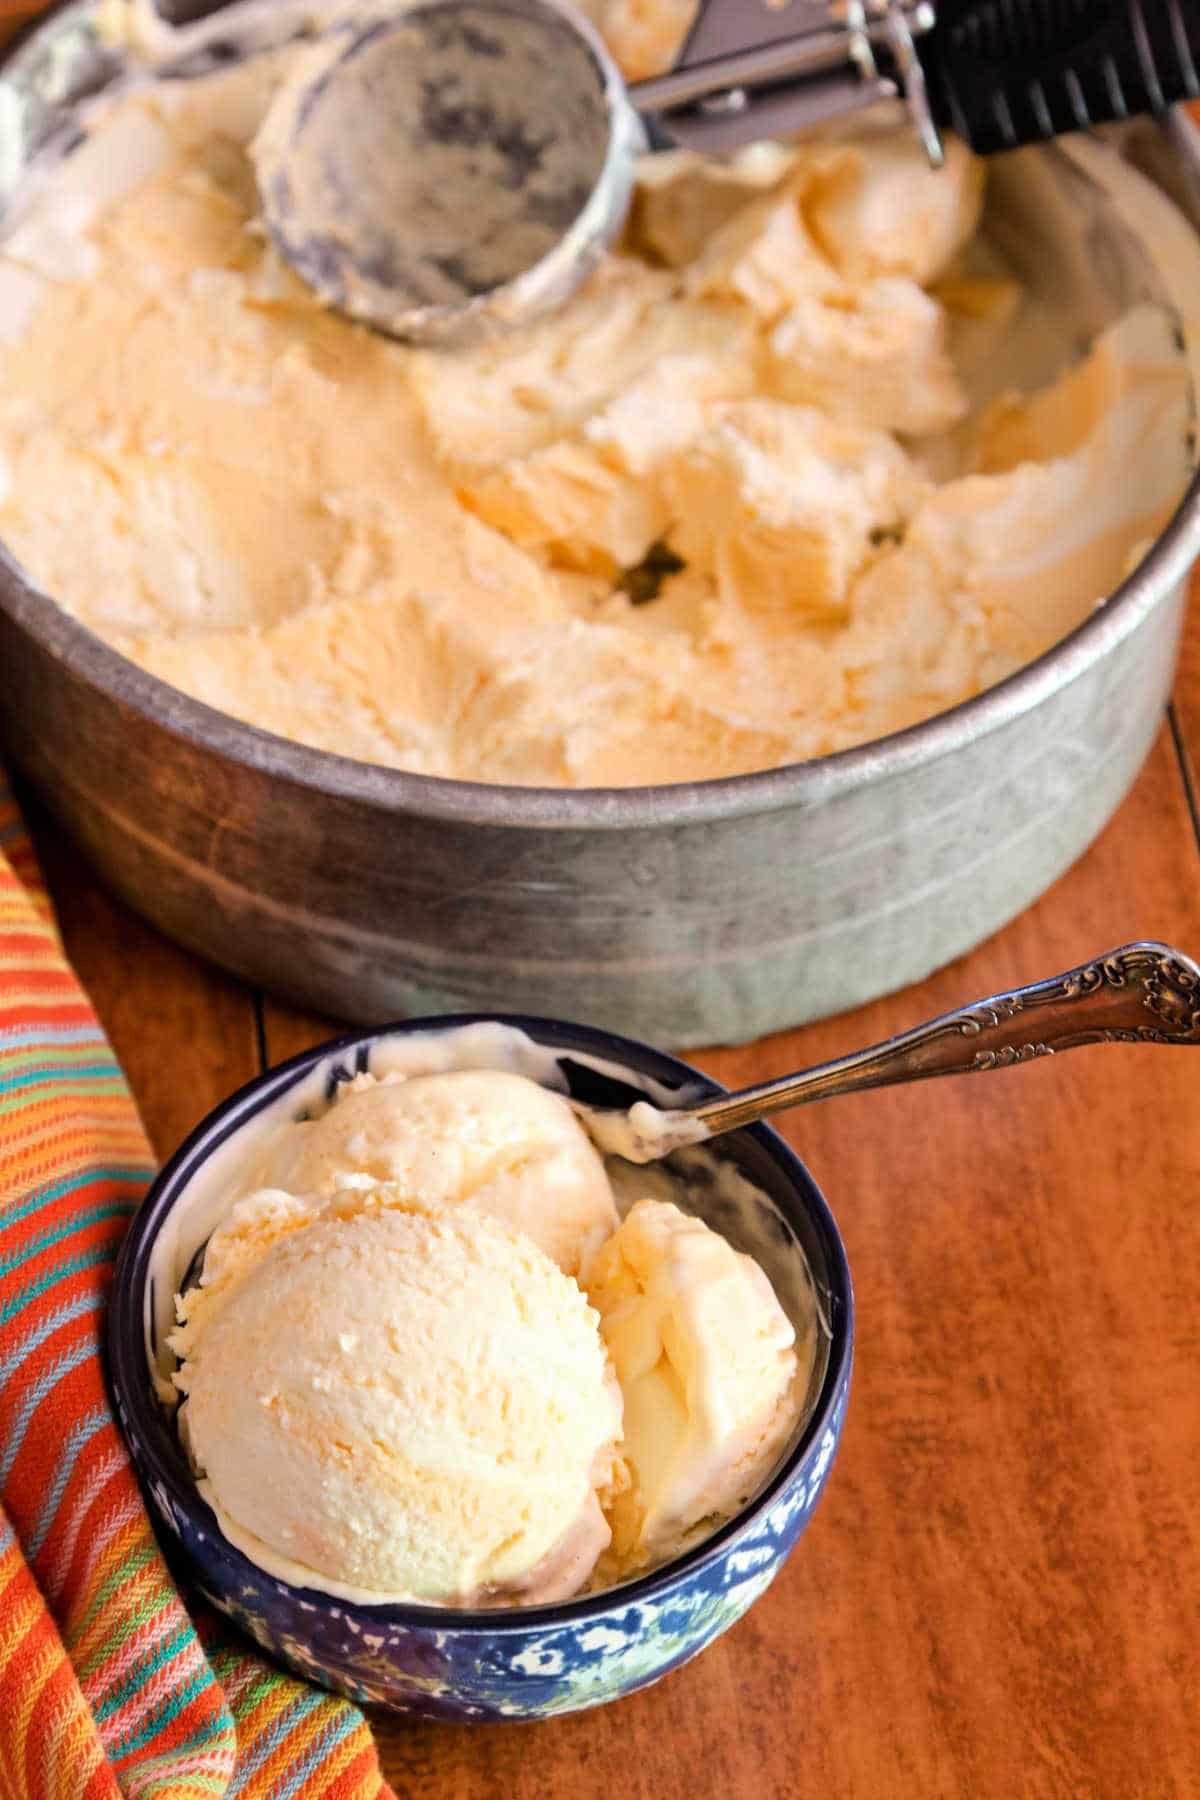 A dish of creamsicle ice cream with container and scoop in the background.